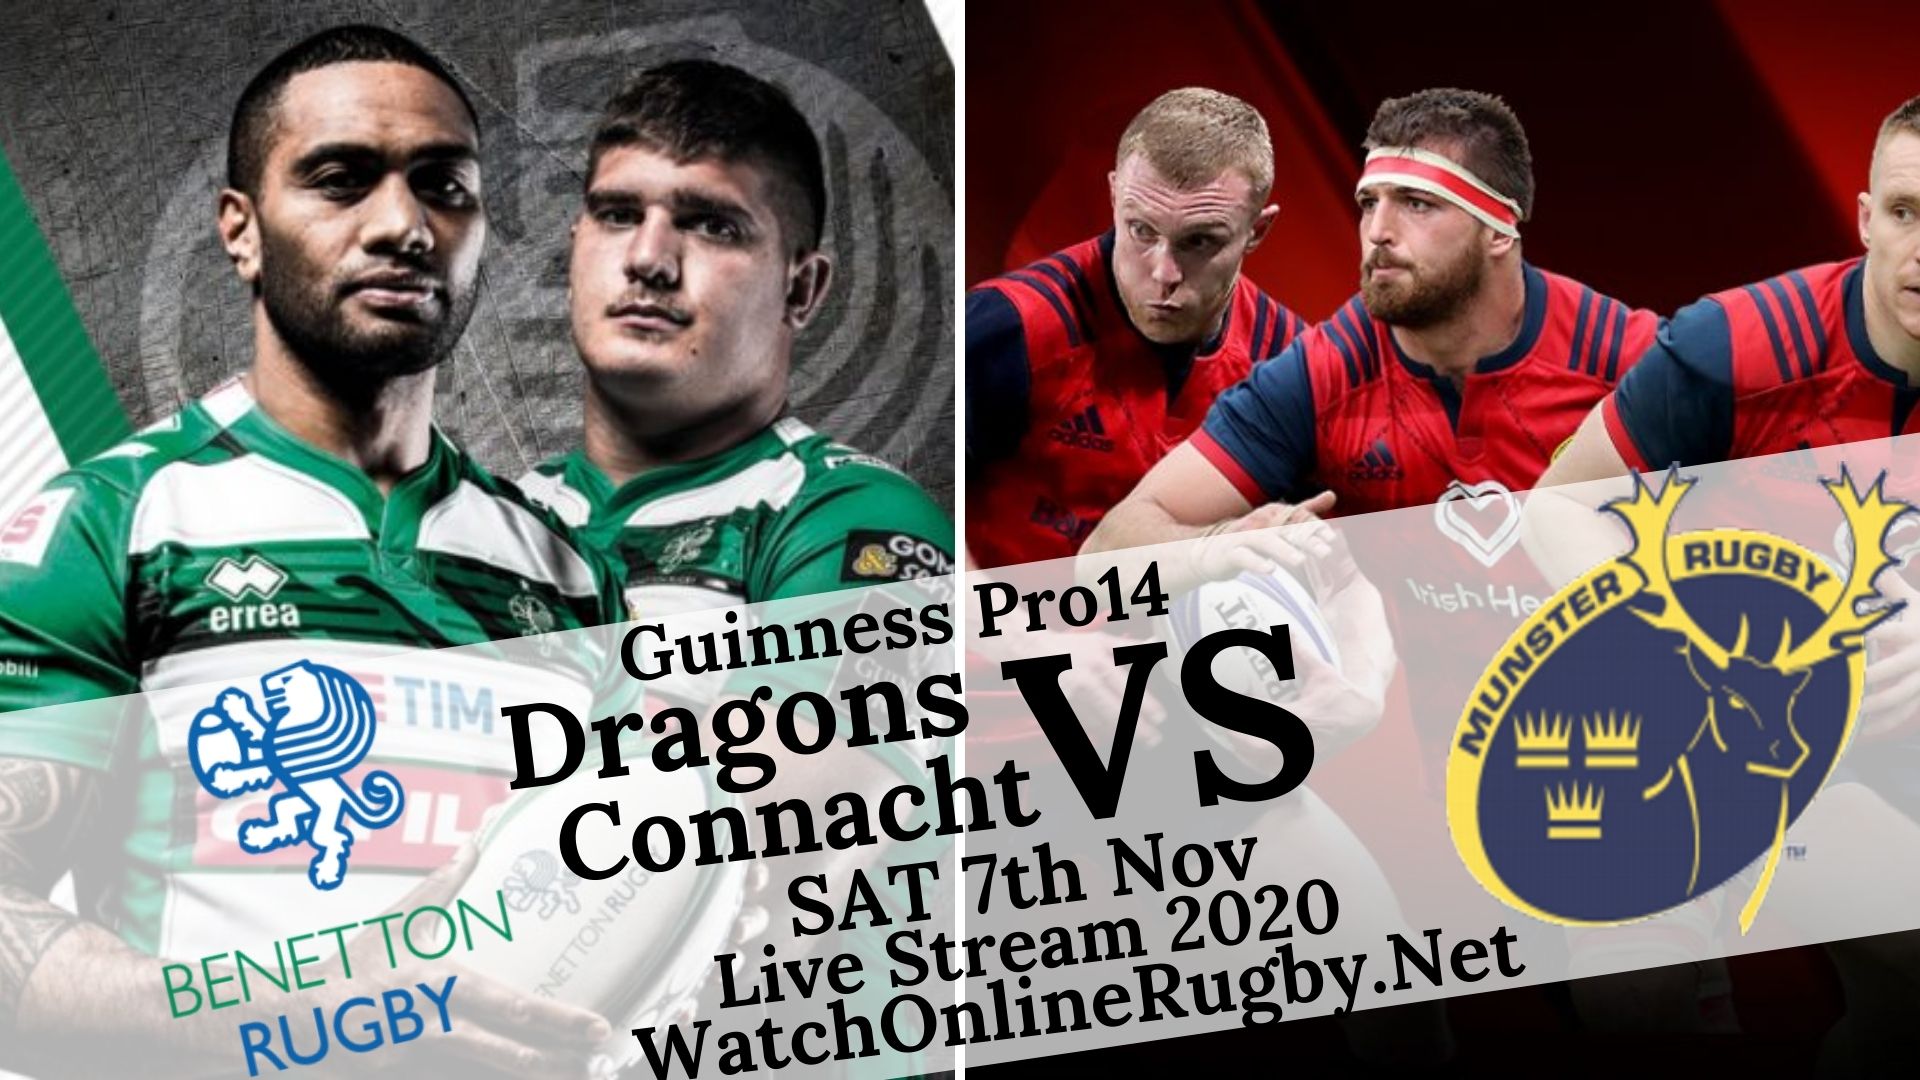 Connacht vs Dragons Rugby Live